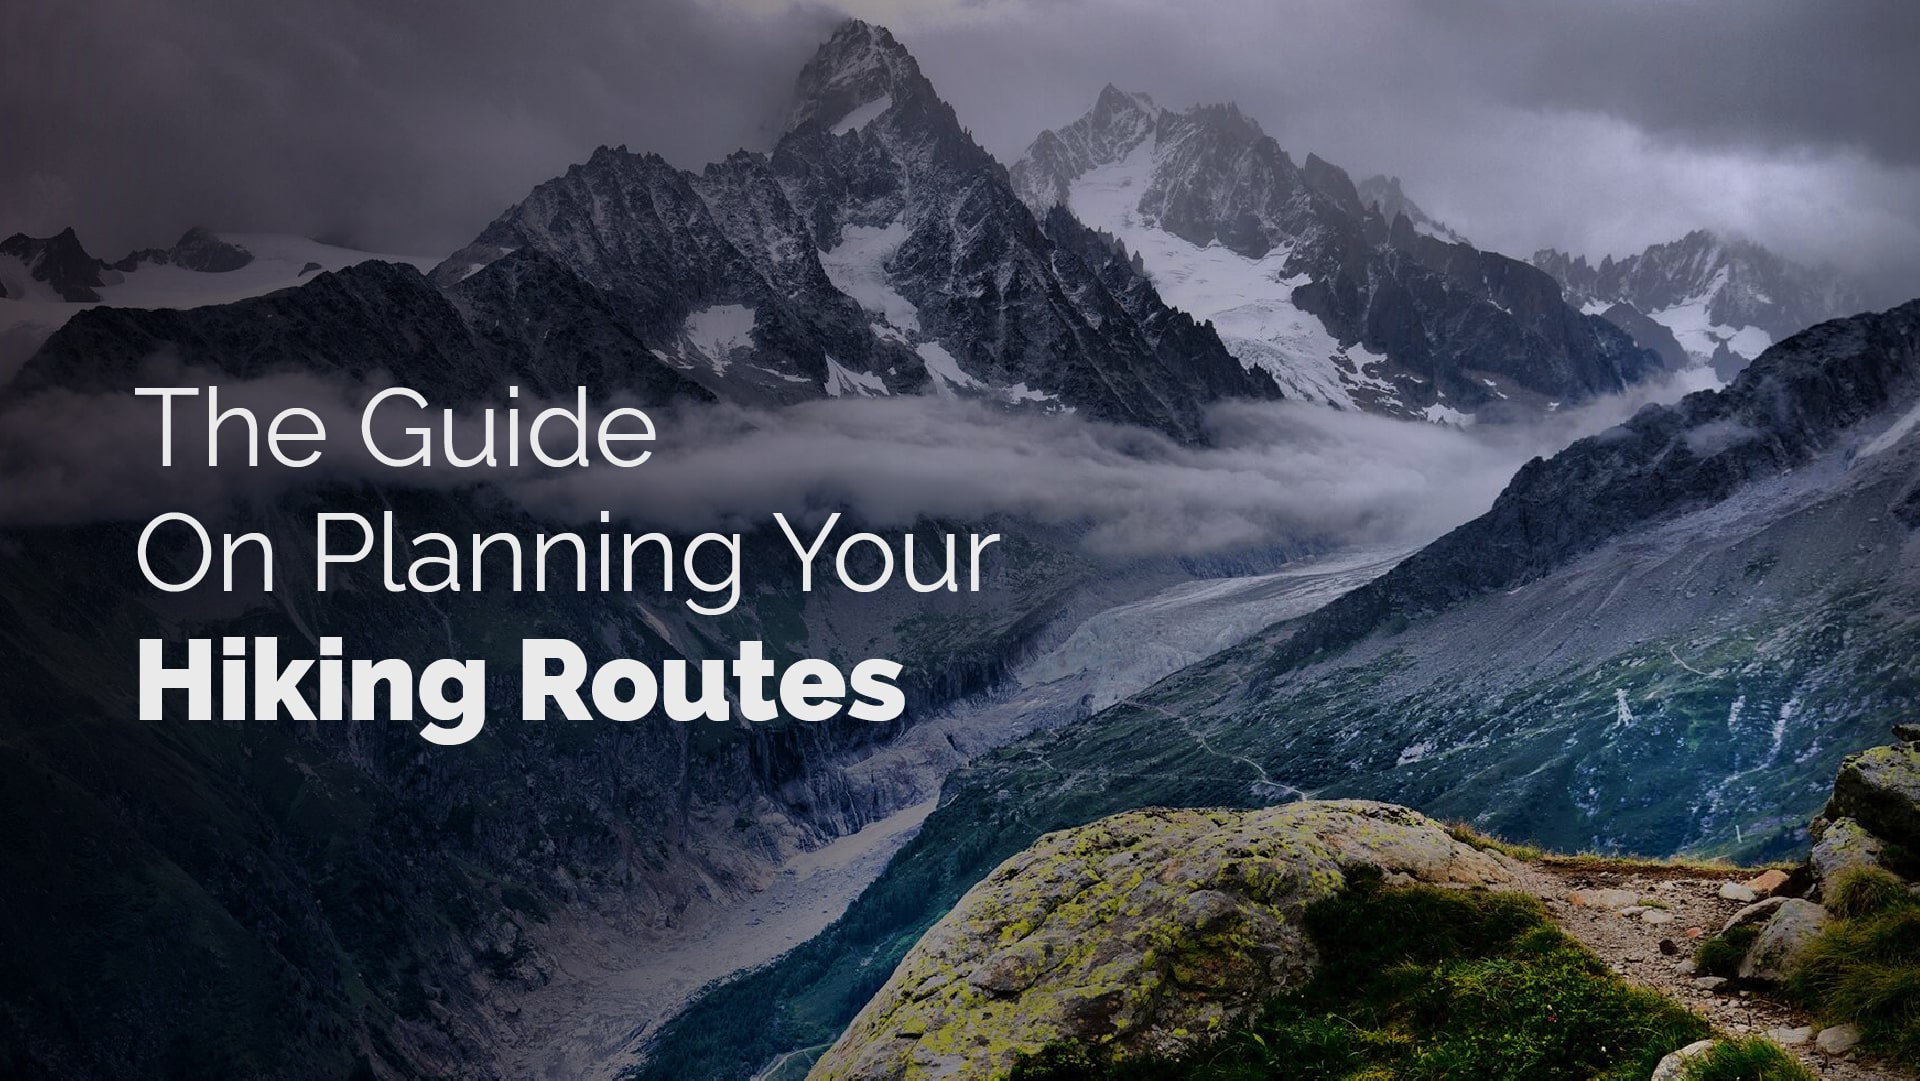 The Guide On Planning Your Hiking Routes